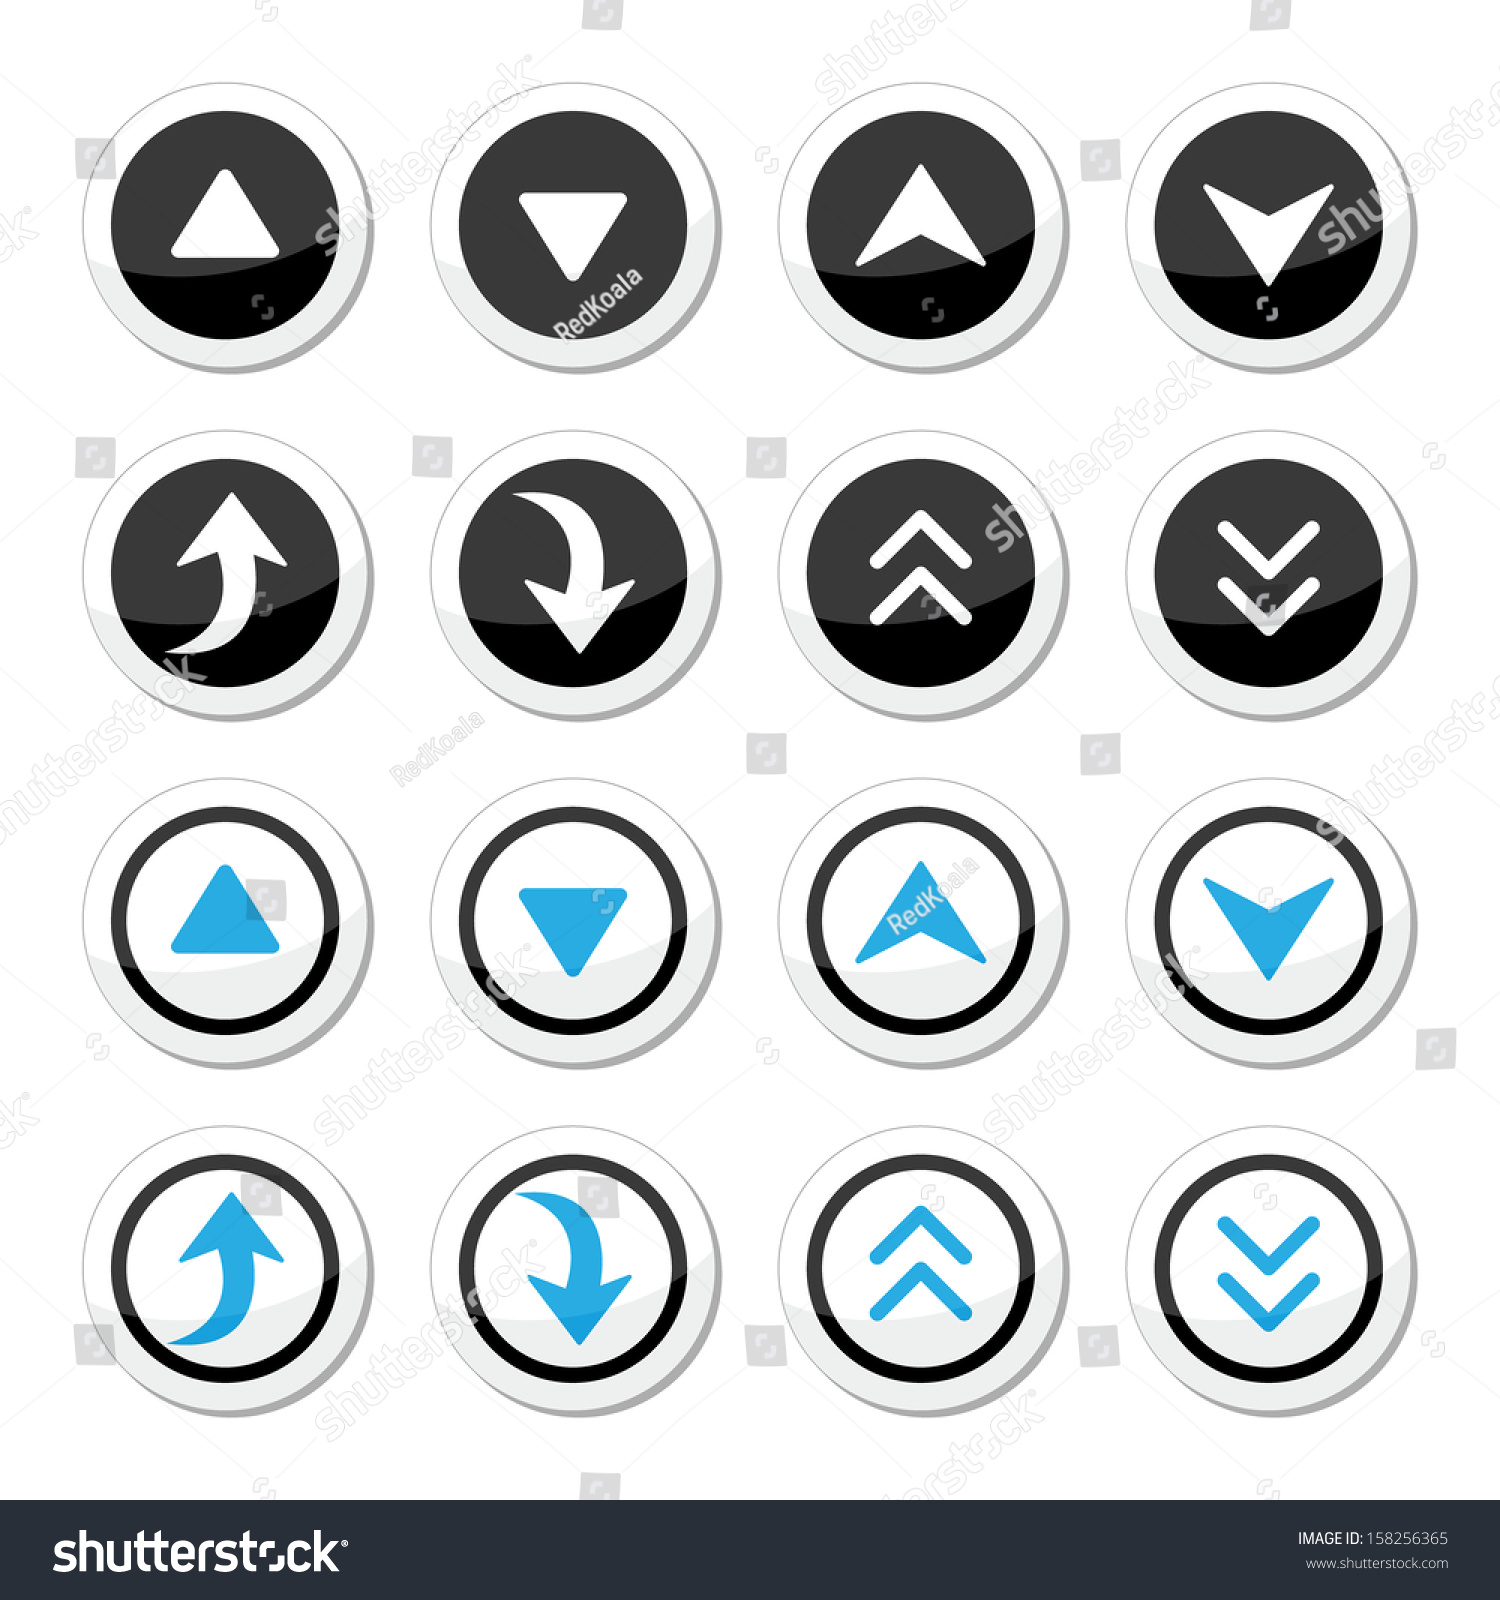 Down Arrows Round Icons Set Stock Vector Royalty Free